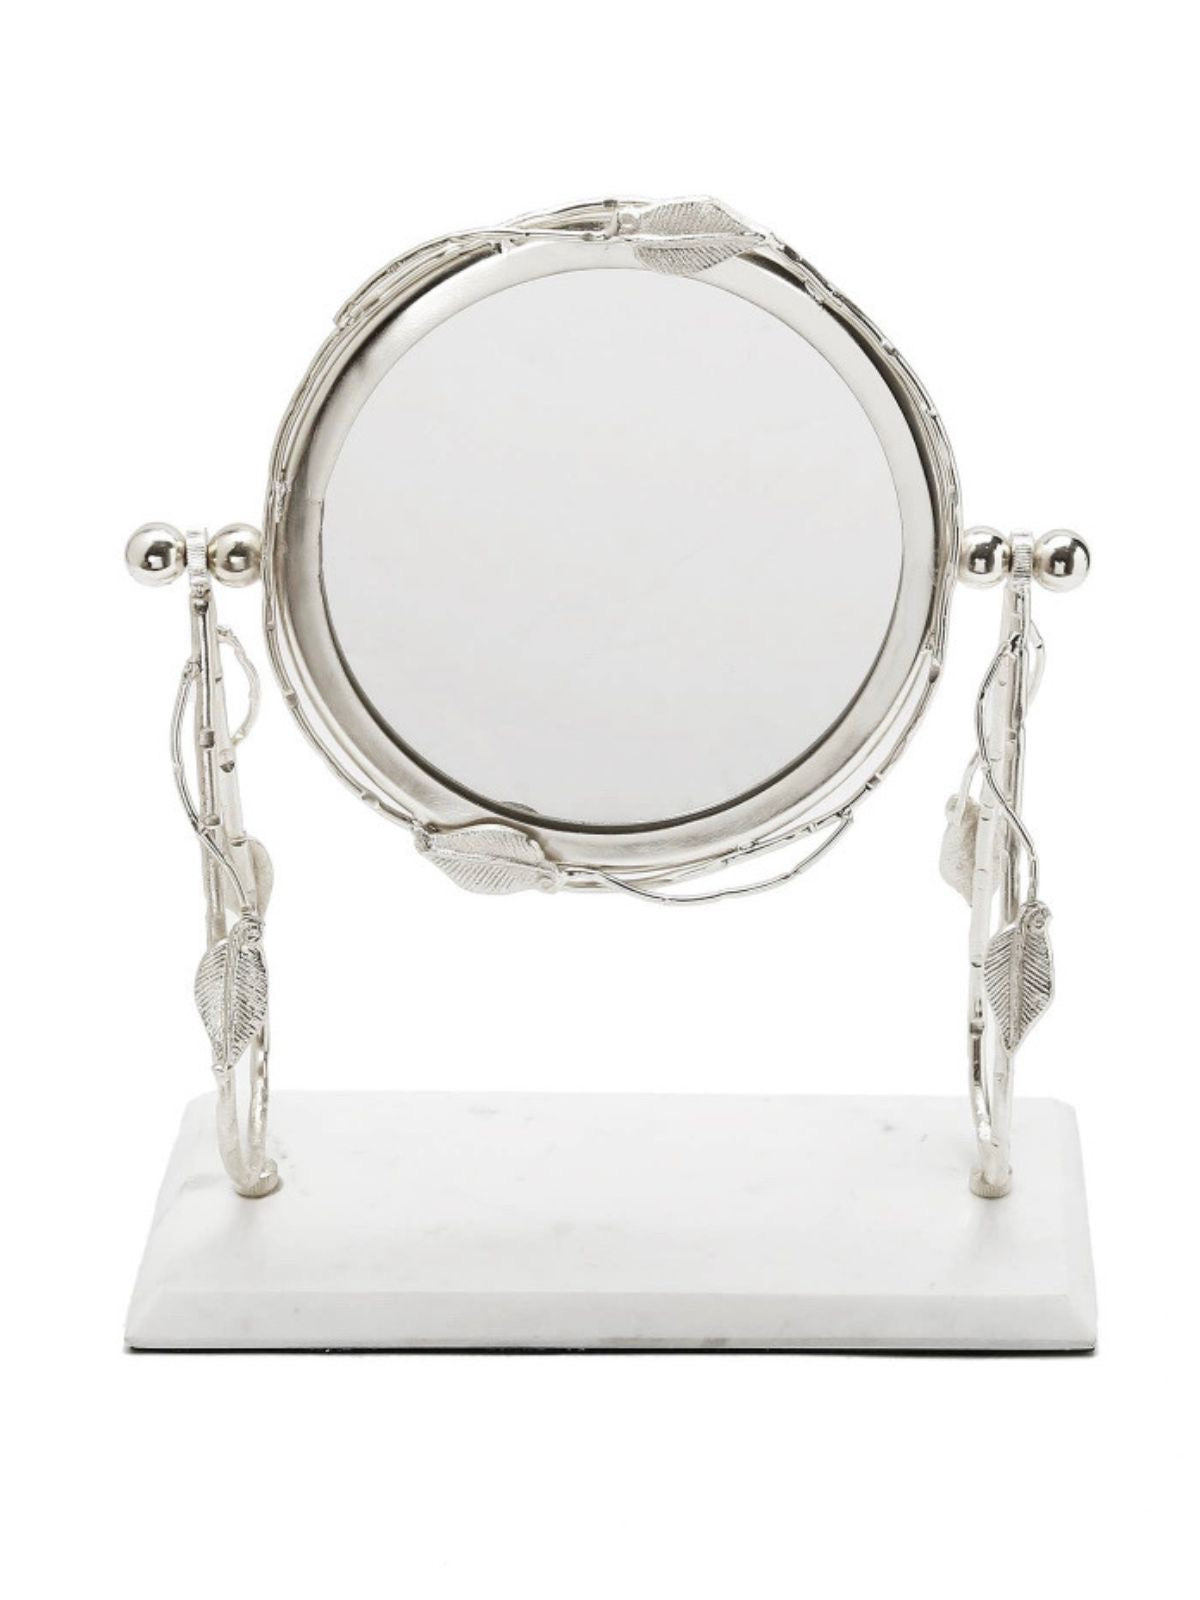 Round Table Mirror with Silver Leaf Design on Marble Base sold by KYA Home Decor.